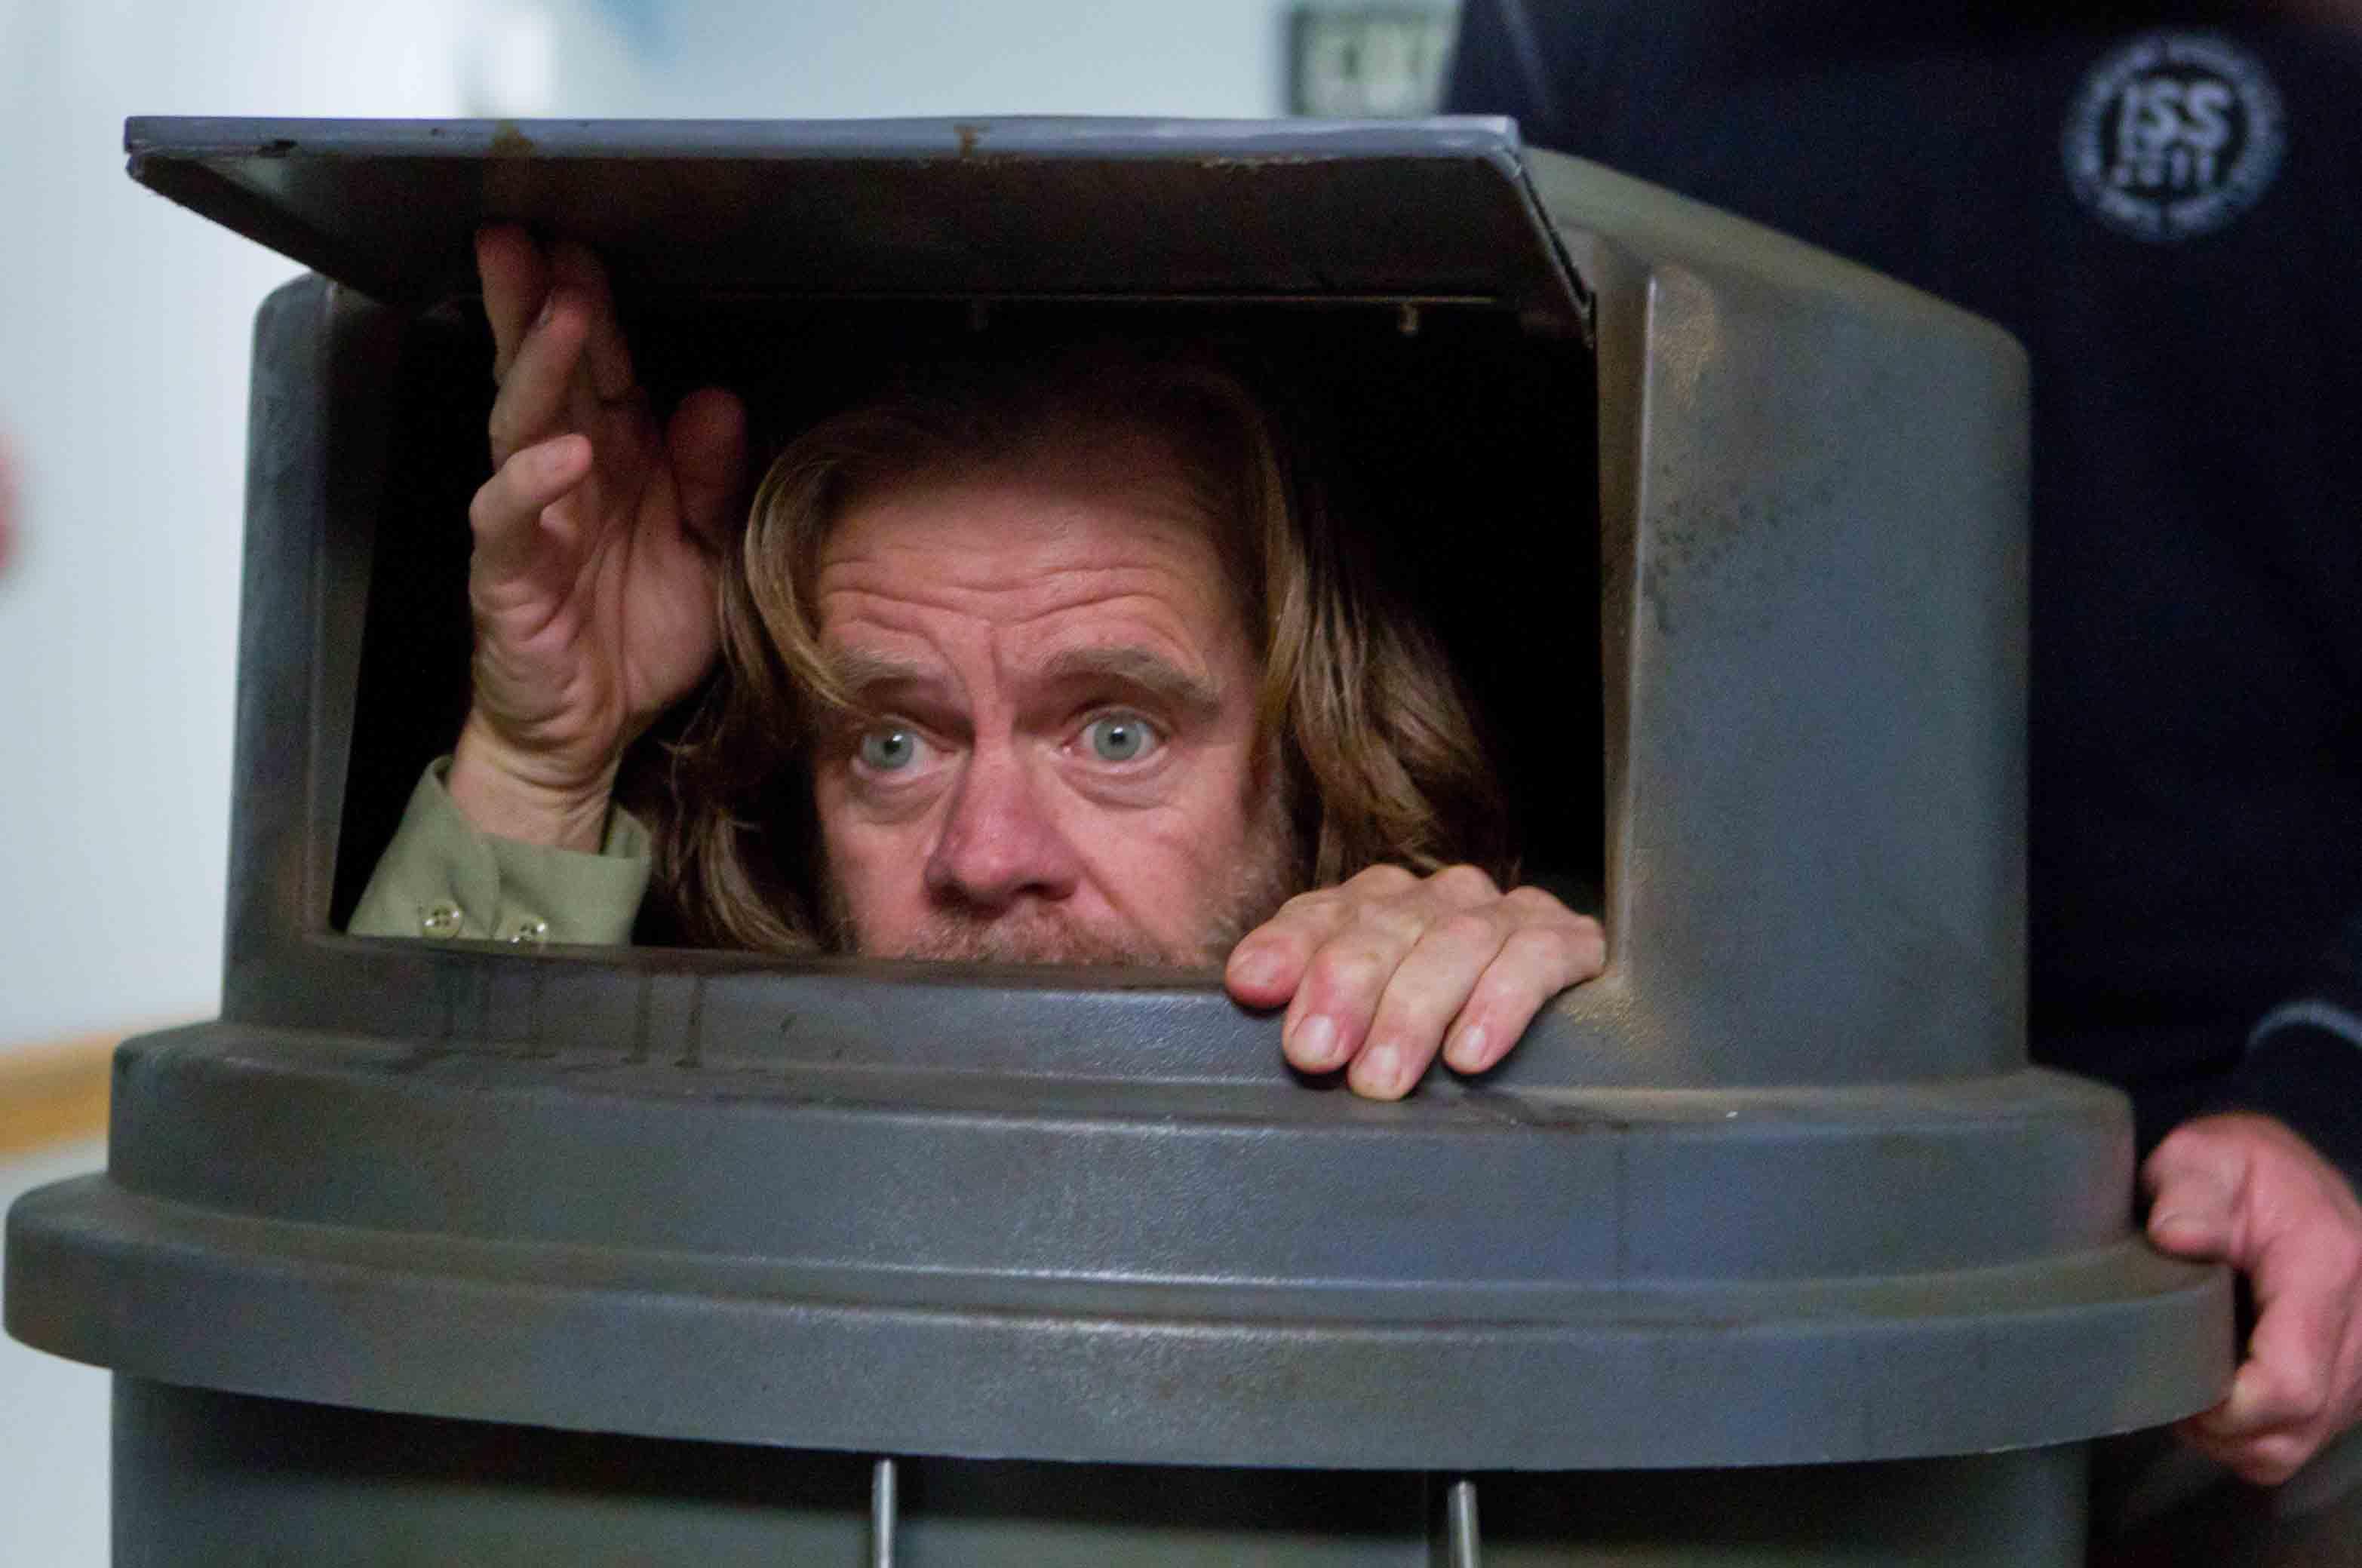 William H. Macy On 'Shameless' Season 6: “It's All About Pregnancy